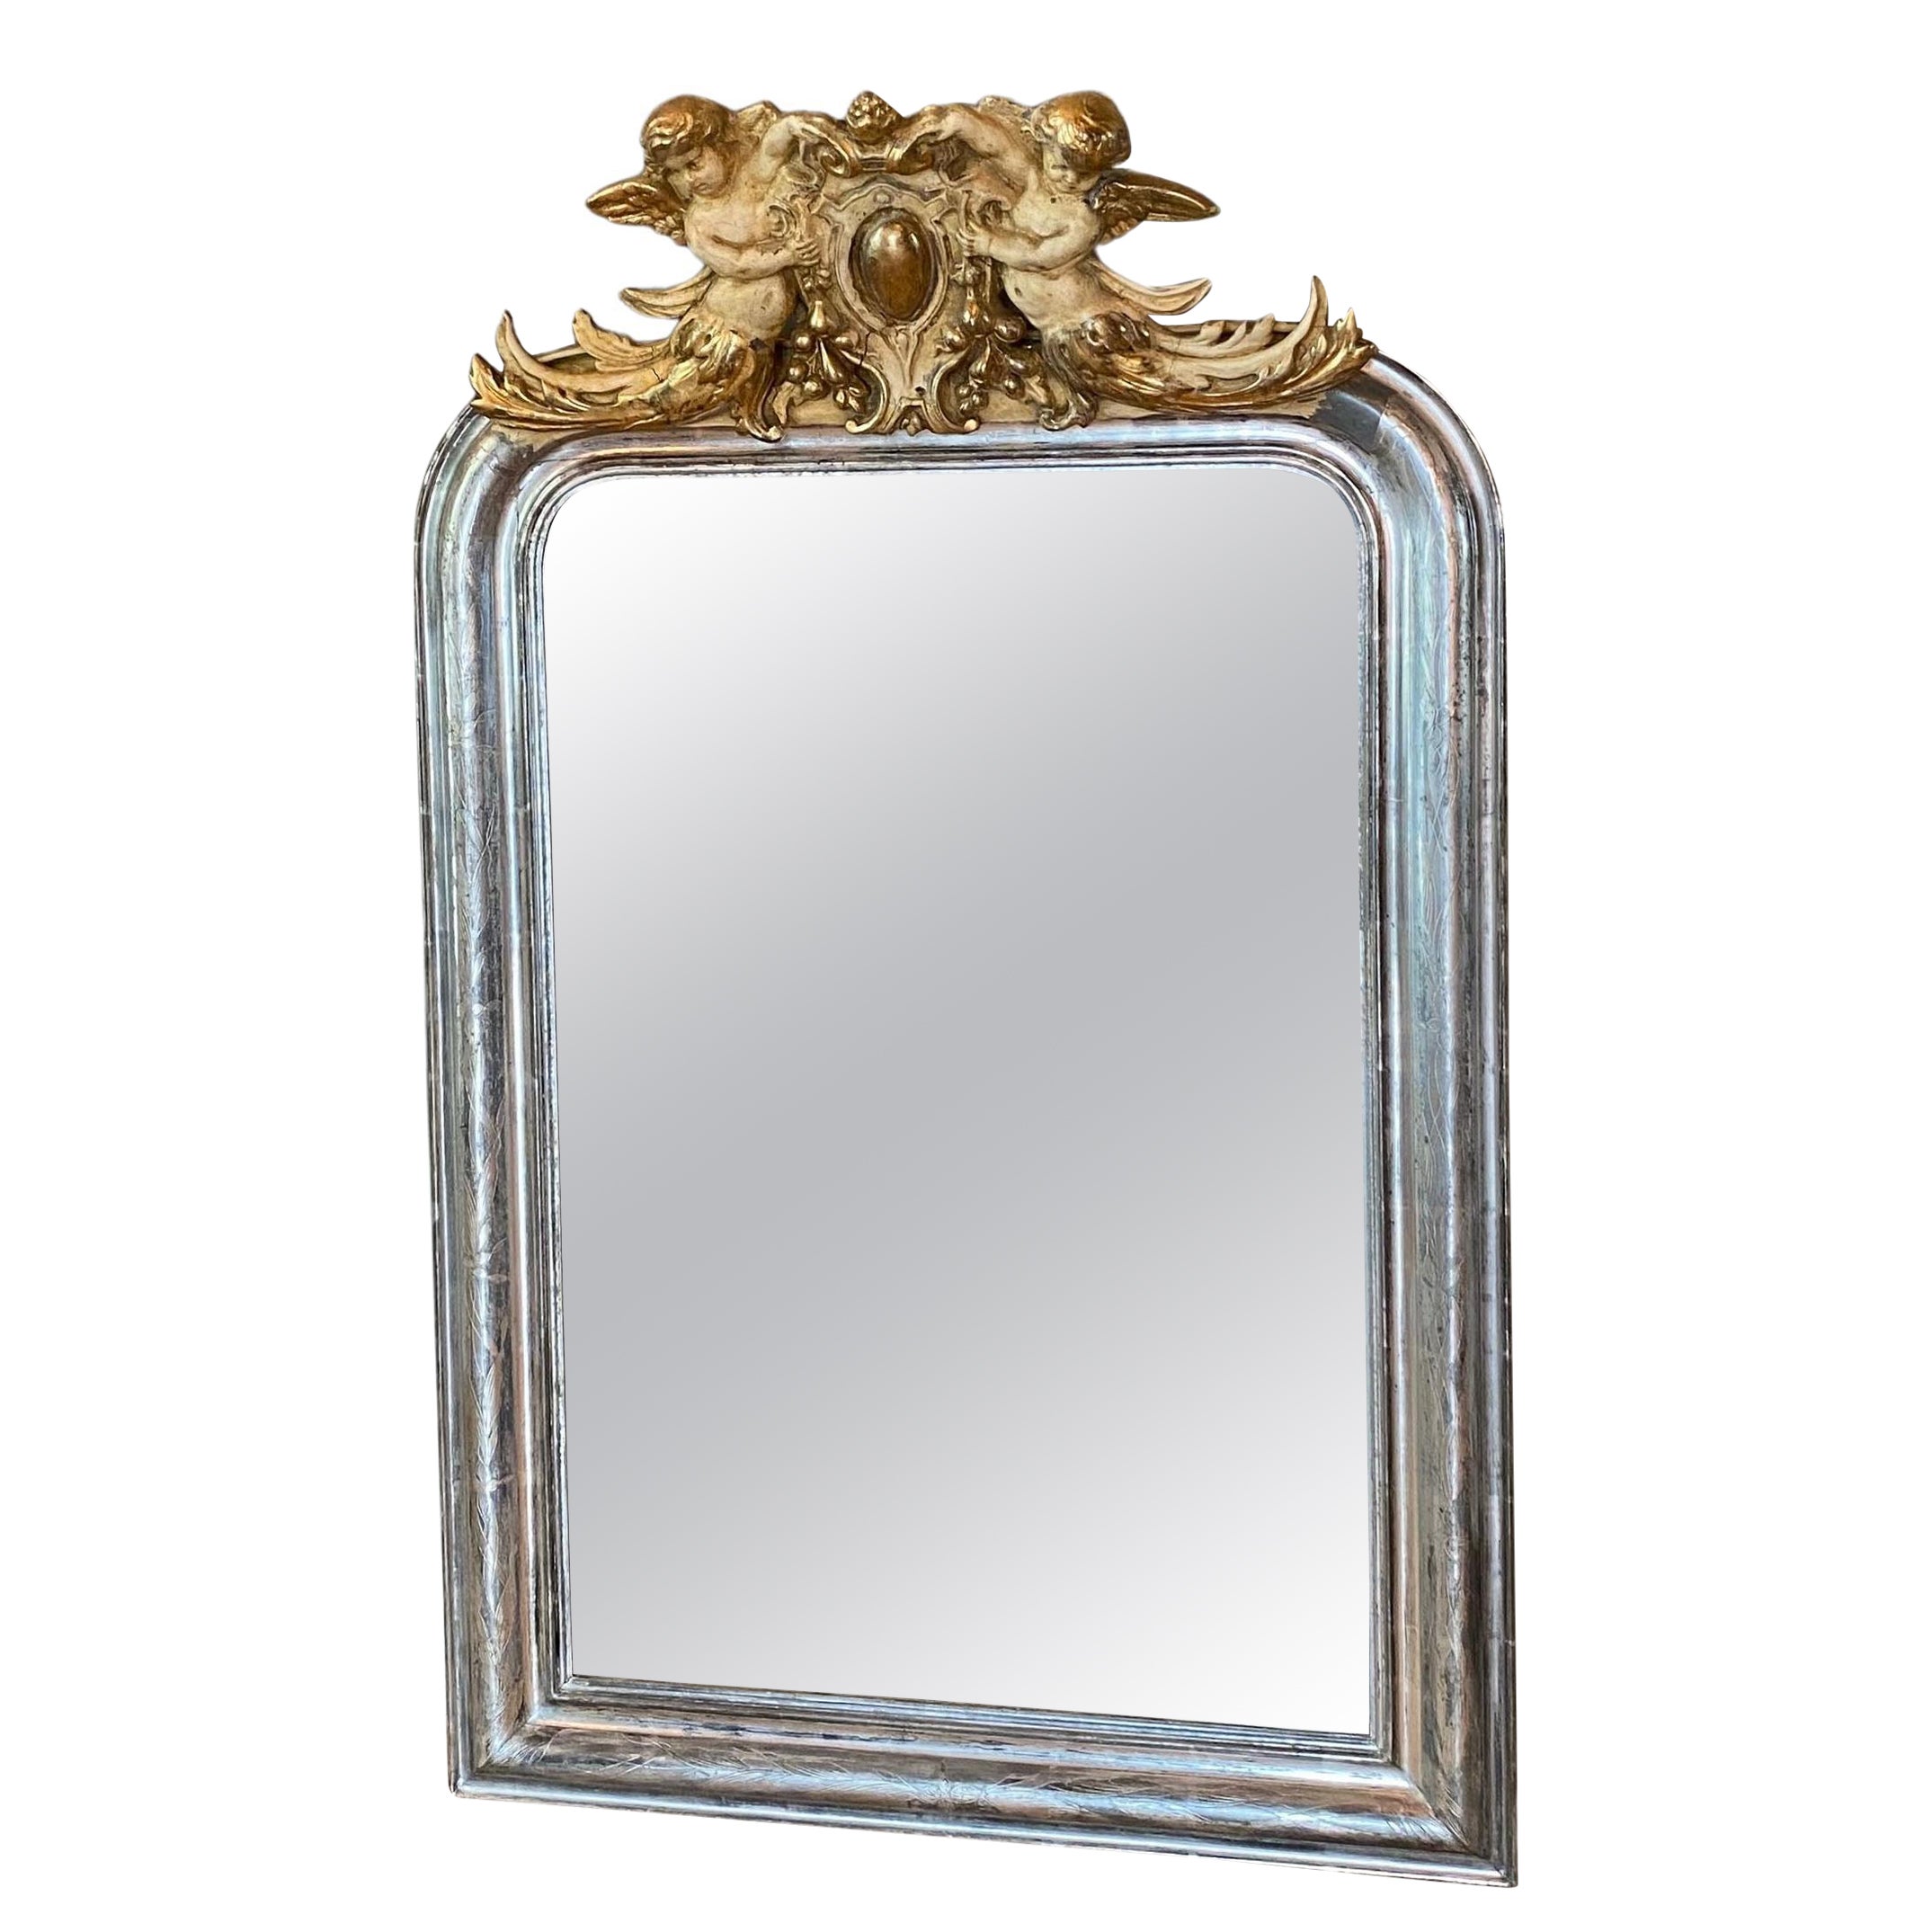 19th century silver leaf gilt French mirror with a crest with putti